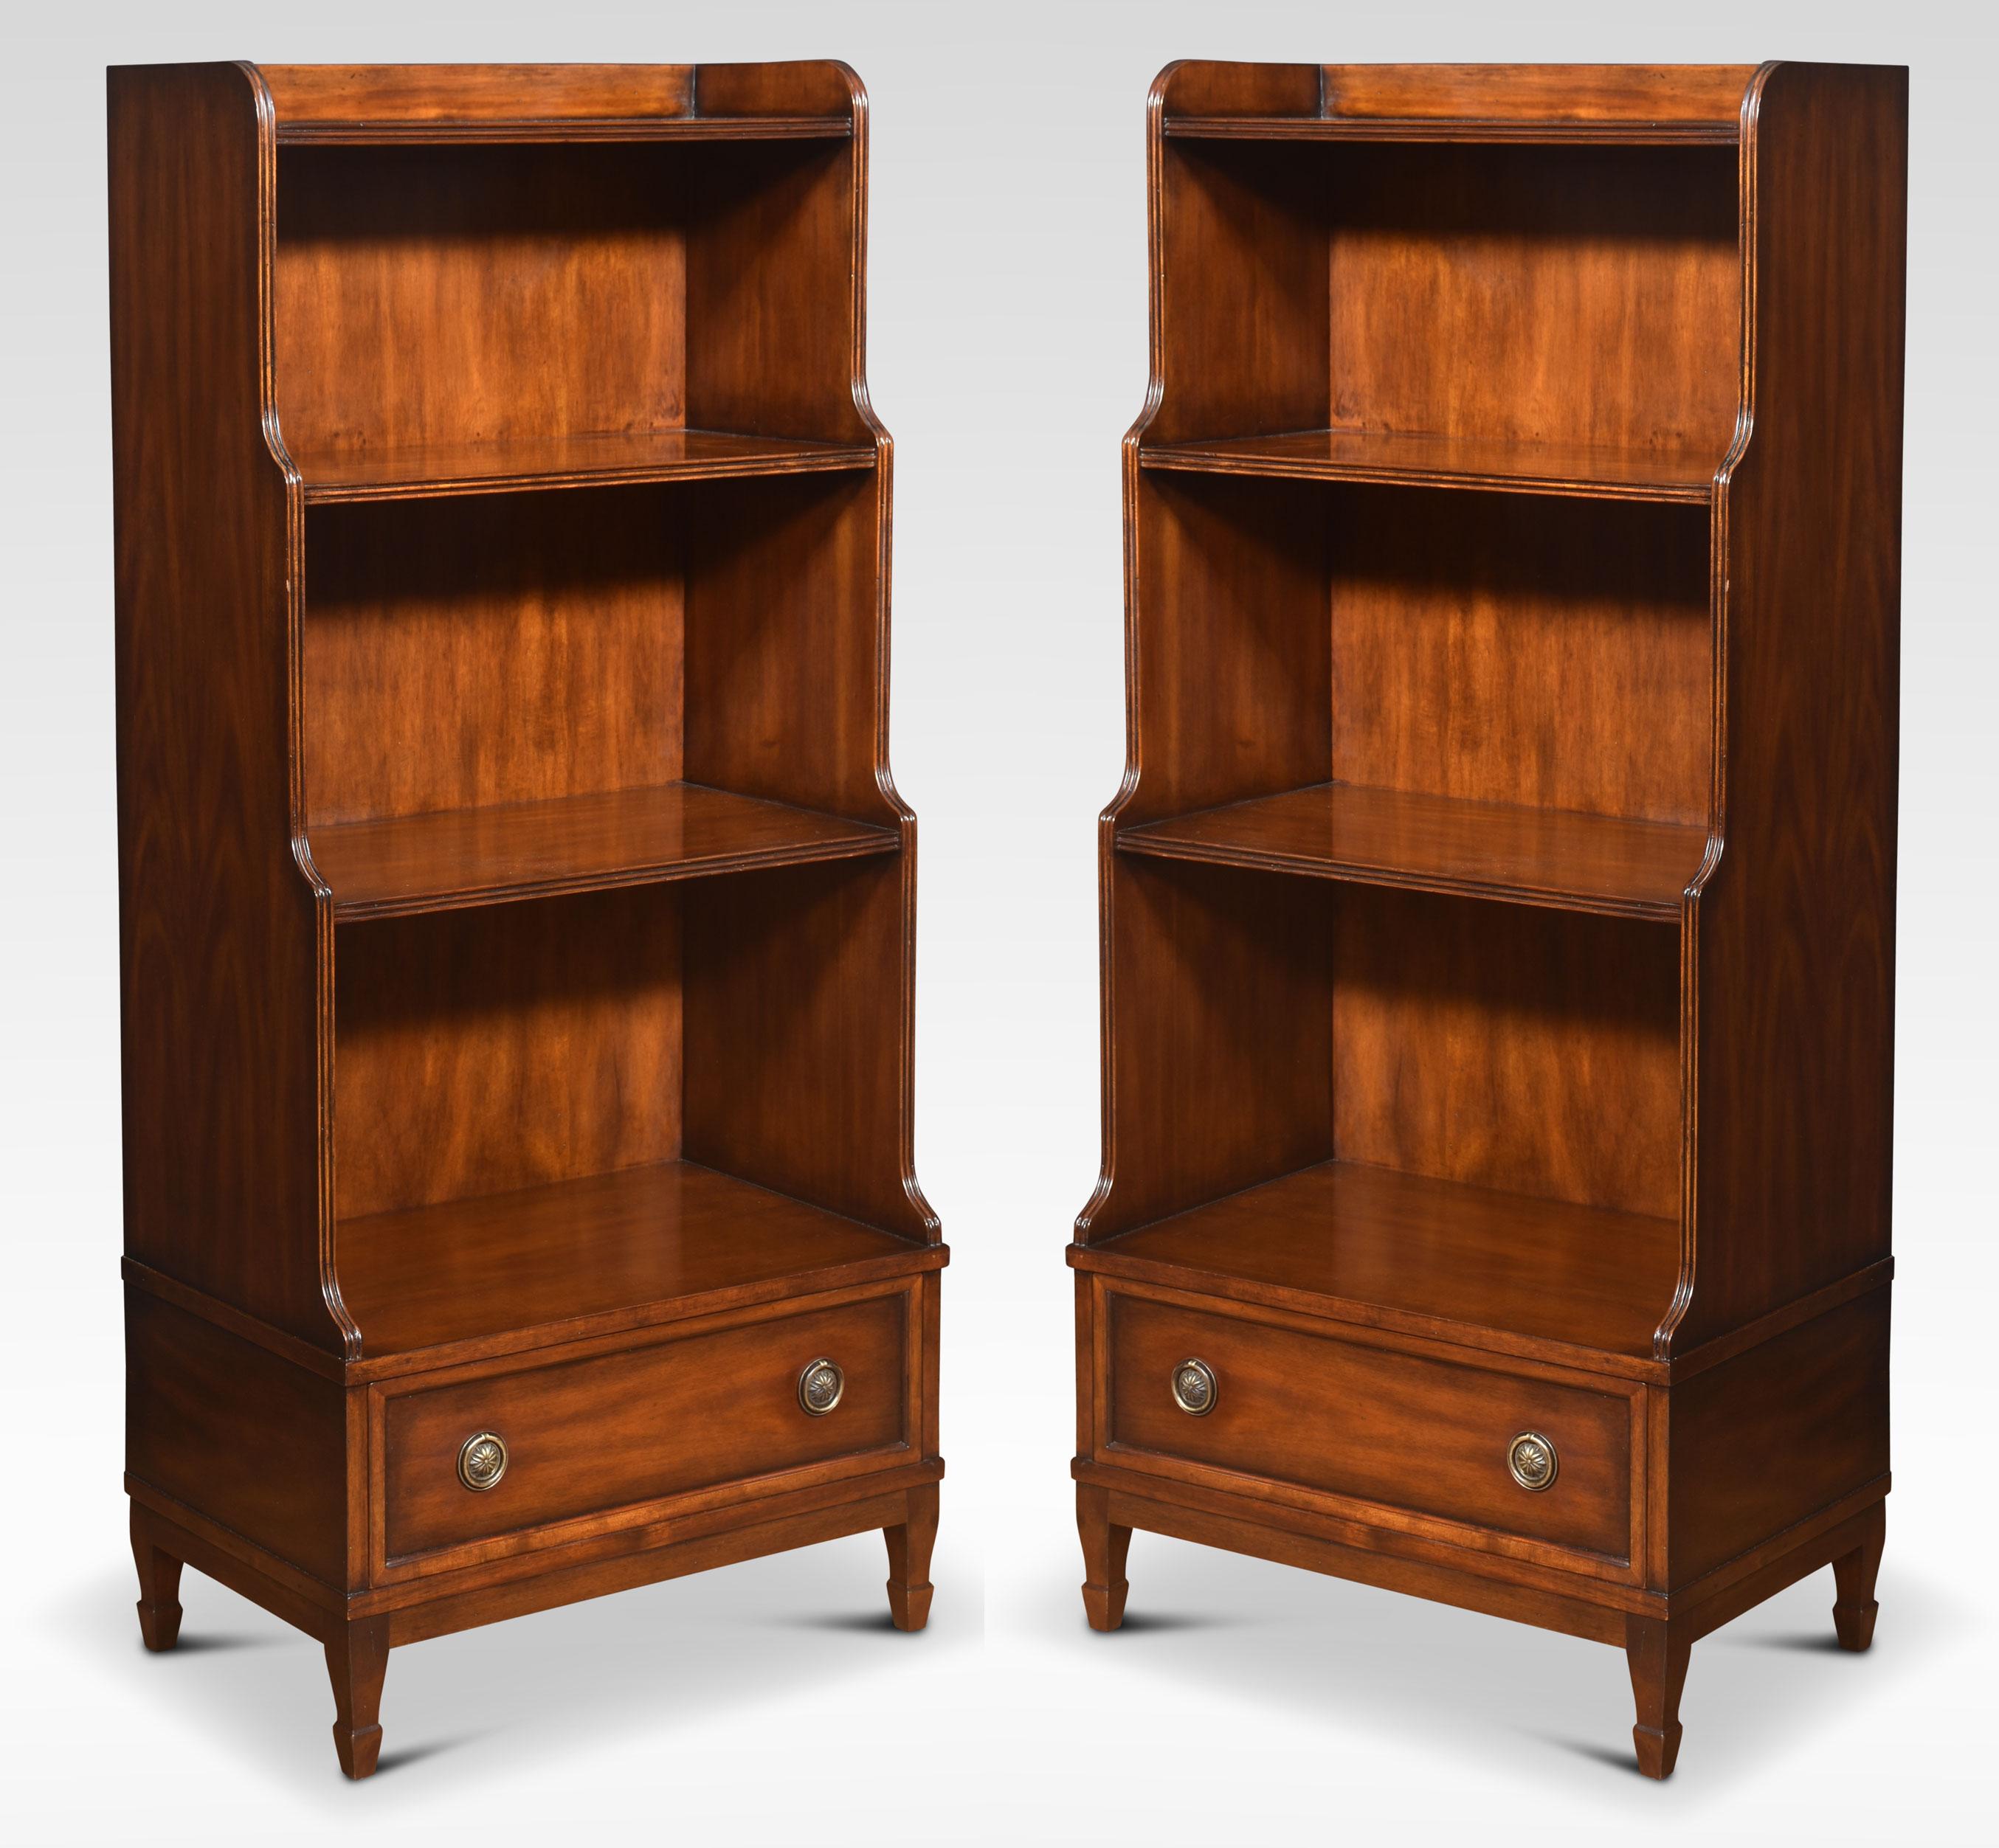 British Pair of waterfall bookcases For Sale